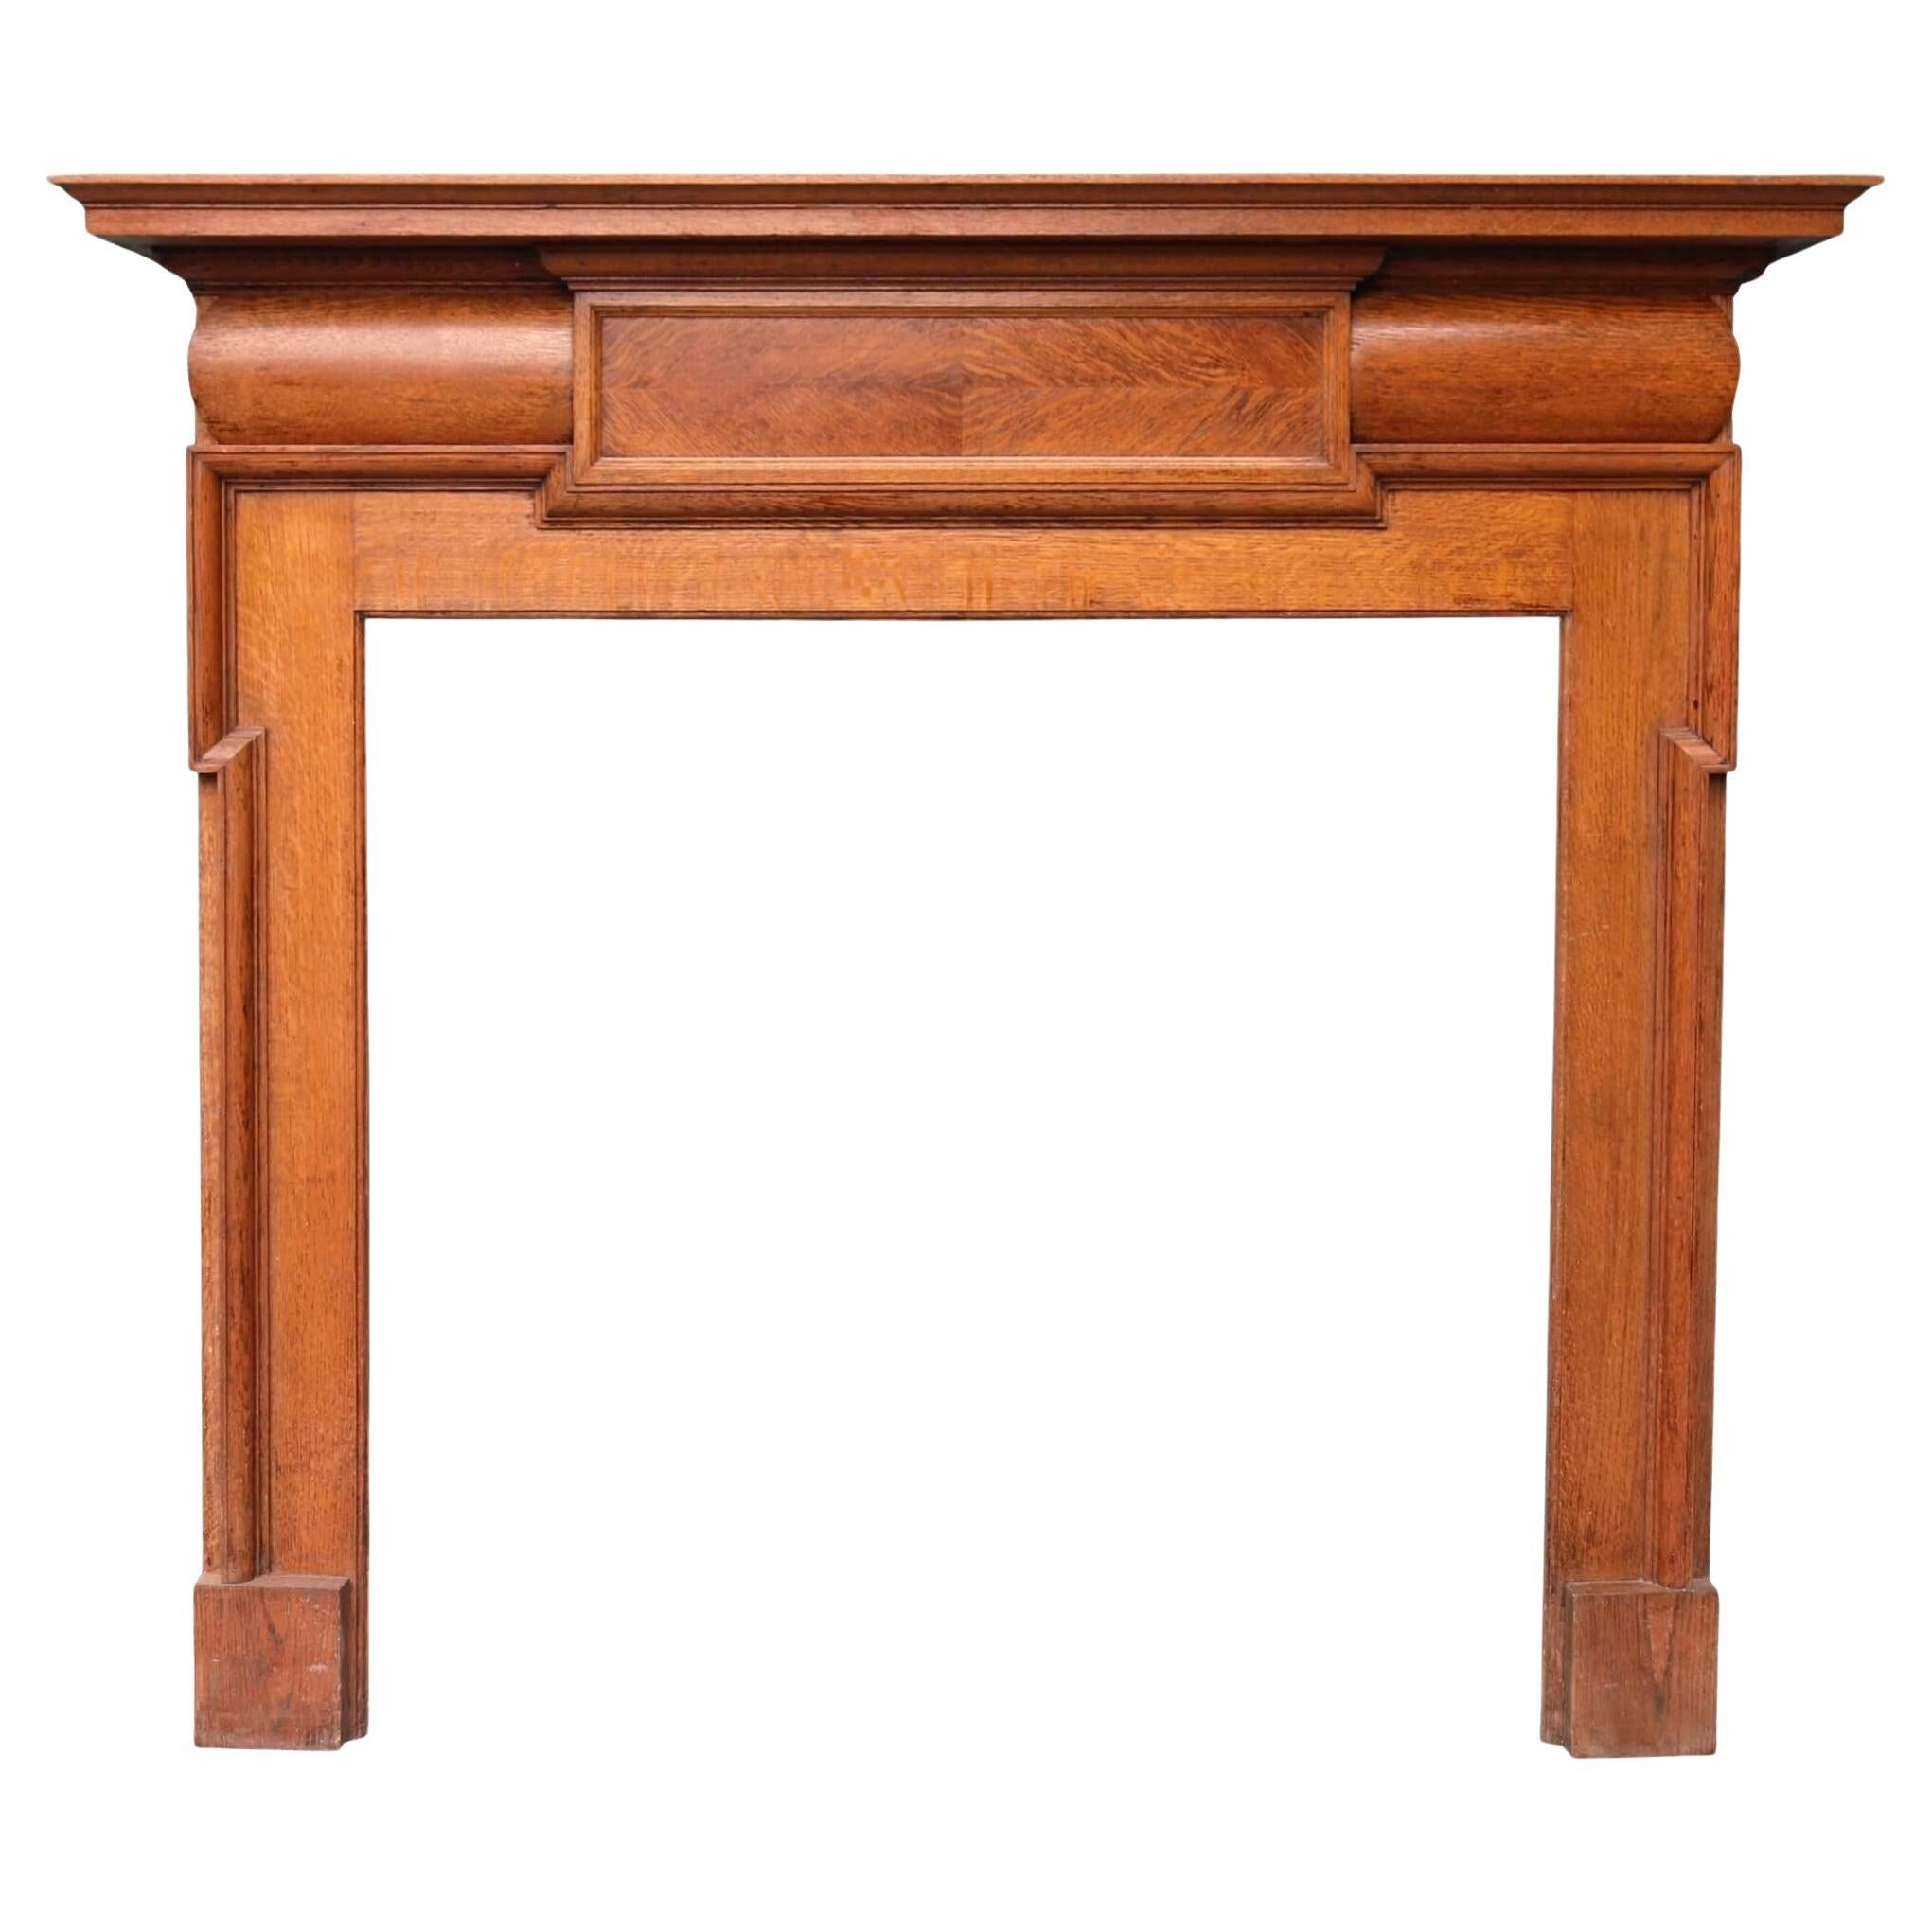 English Victorian Solid Oak Fire Mantel For Sale